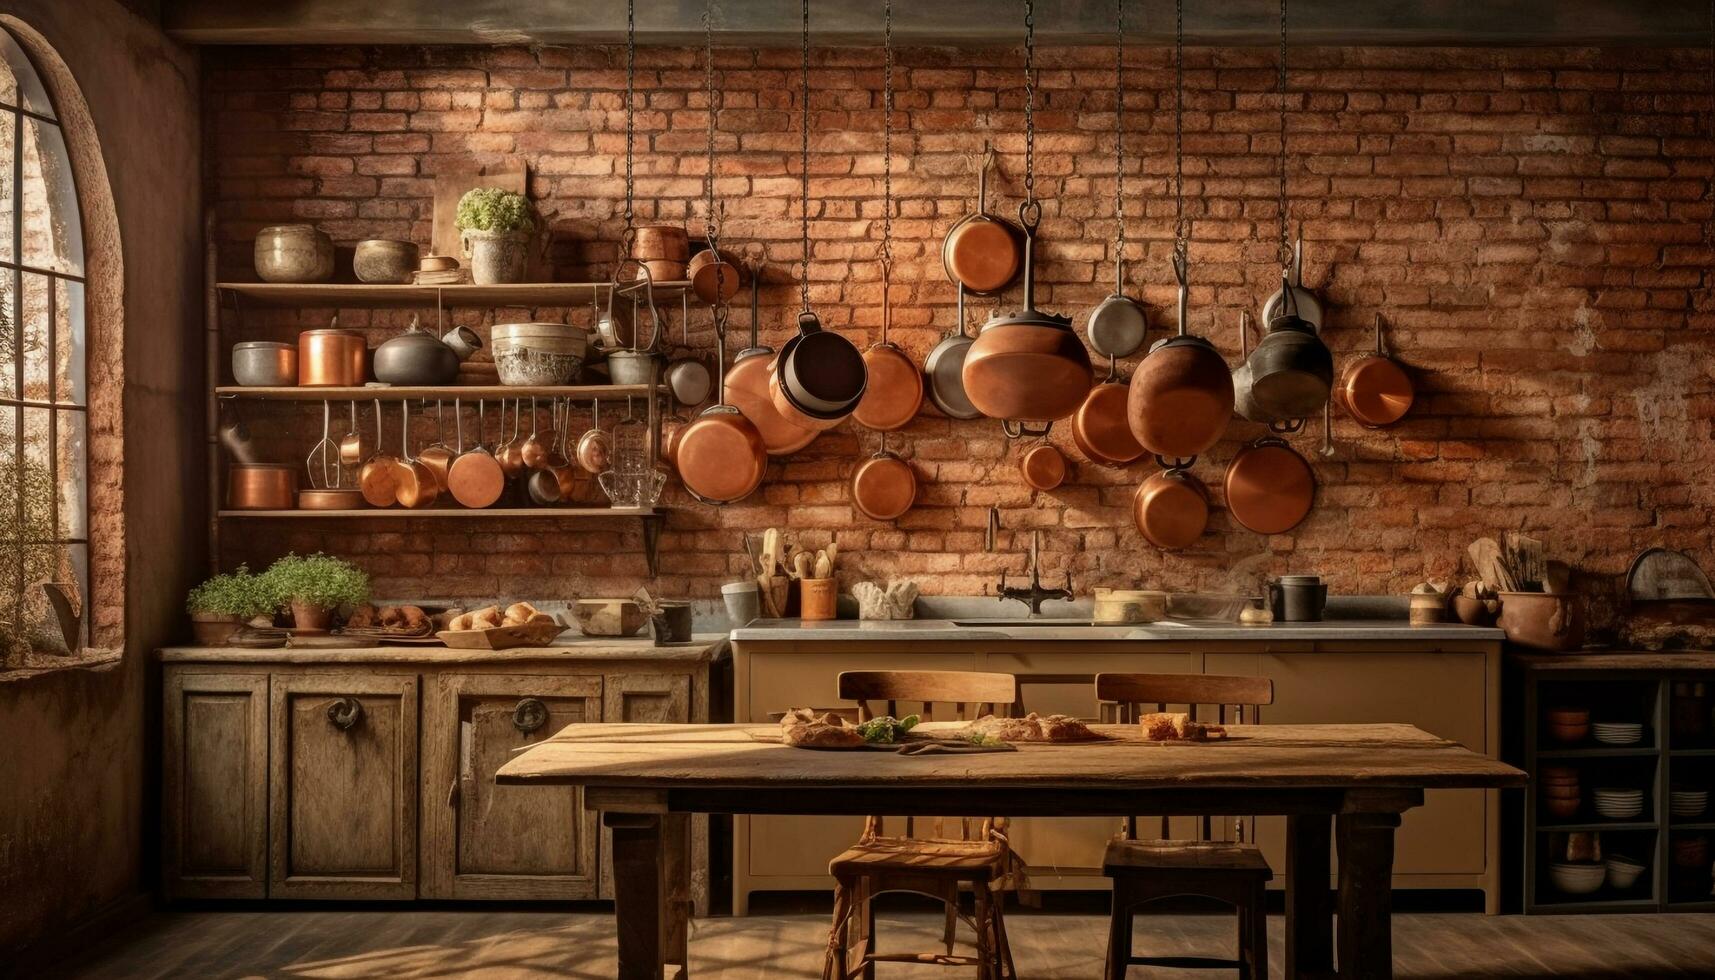 https://static.vecteezy.com/system/resources/previews/026/447/382/non_2x/rustic-kitchen-utensils-adorn-modern-shelves-in-domestic-kitchen-decor-generated-by-ai-free-photo.jpg